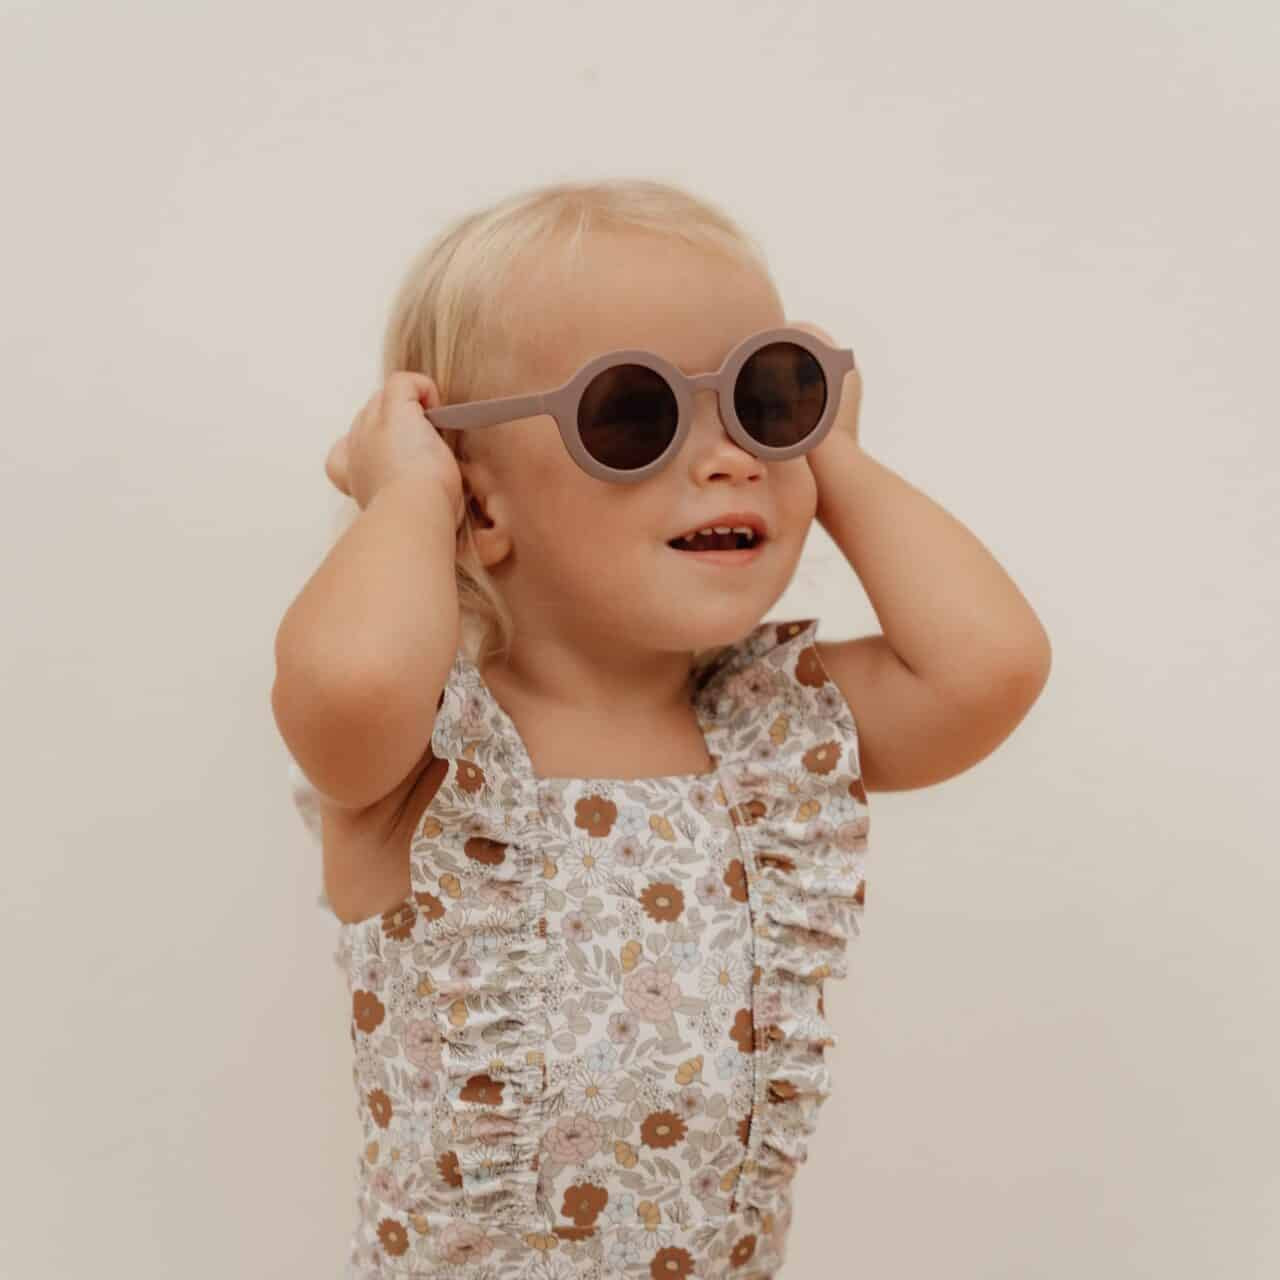 Girl wearing Fato de Banho Folhos - Vintage Little Flowers swimsuit by Little Dutch, smiling with sunglasses on.